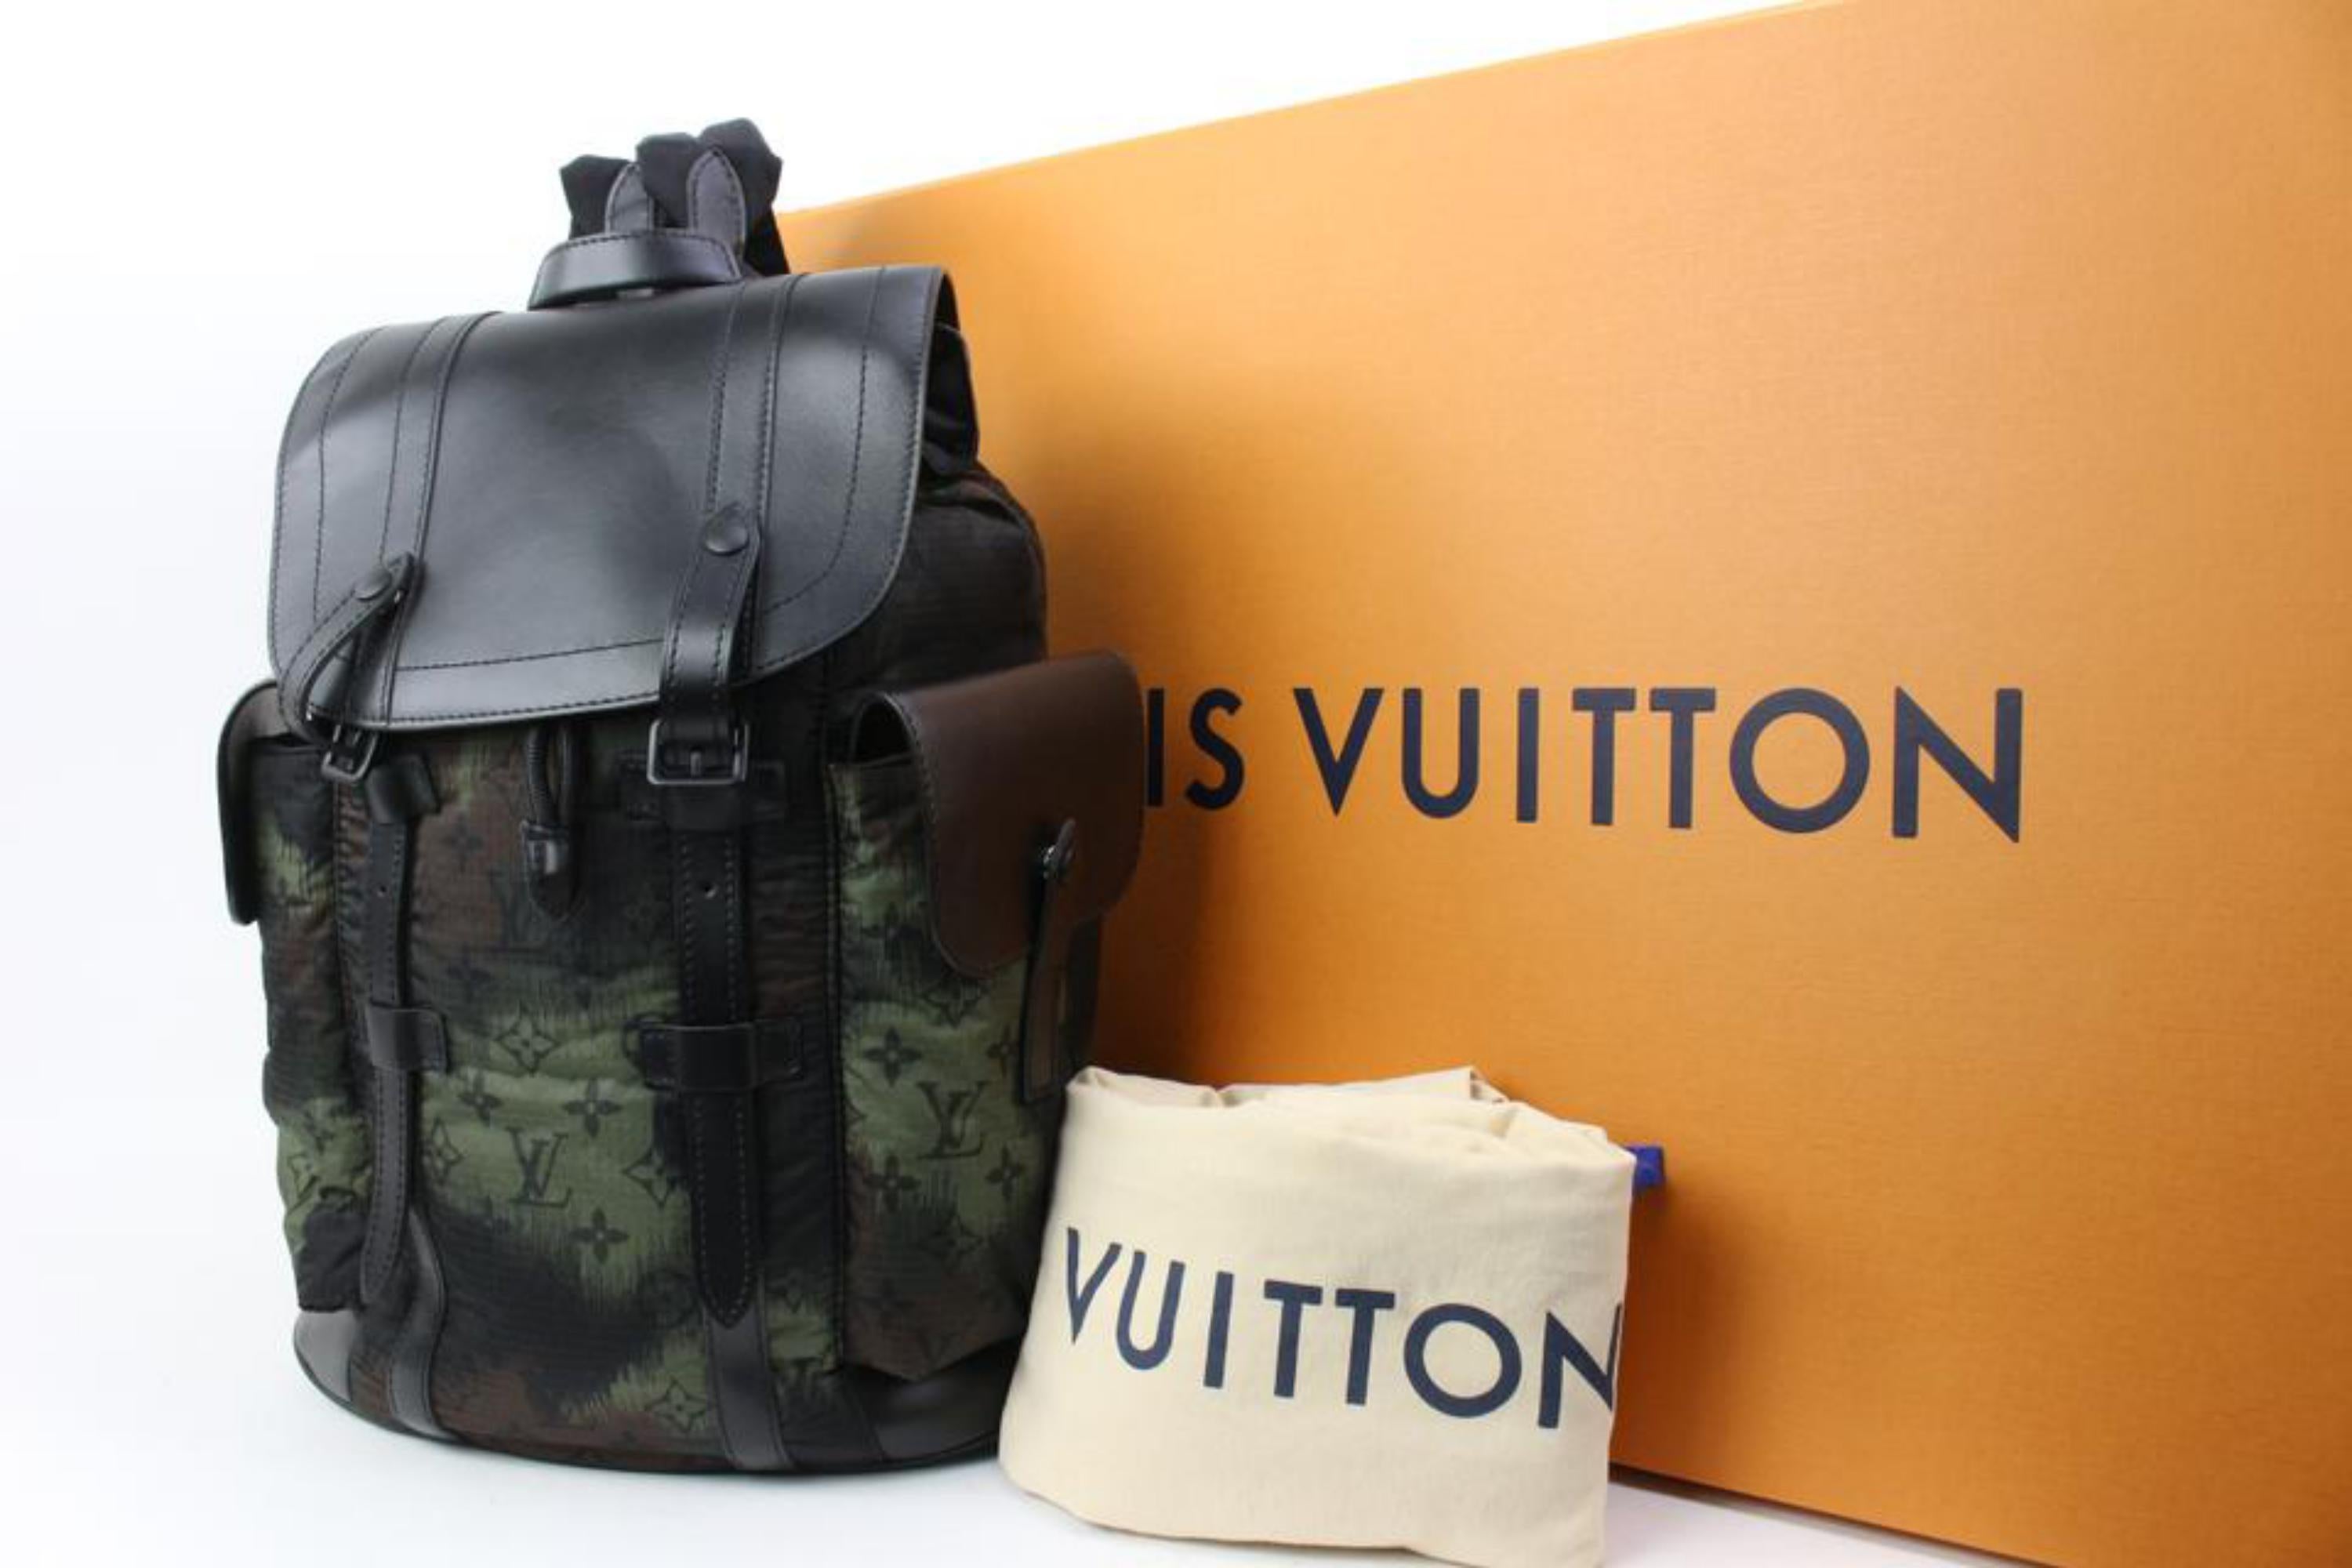 Louis Vuitton Virgil Abloh Monogram Camouflage Christopher PM Backpack Camo 45lk14
Date Code/Serial Number: TR2240
Made In: France
Measurements: Length:  15